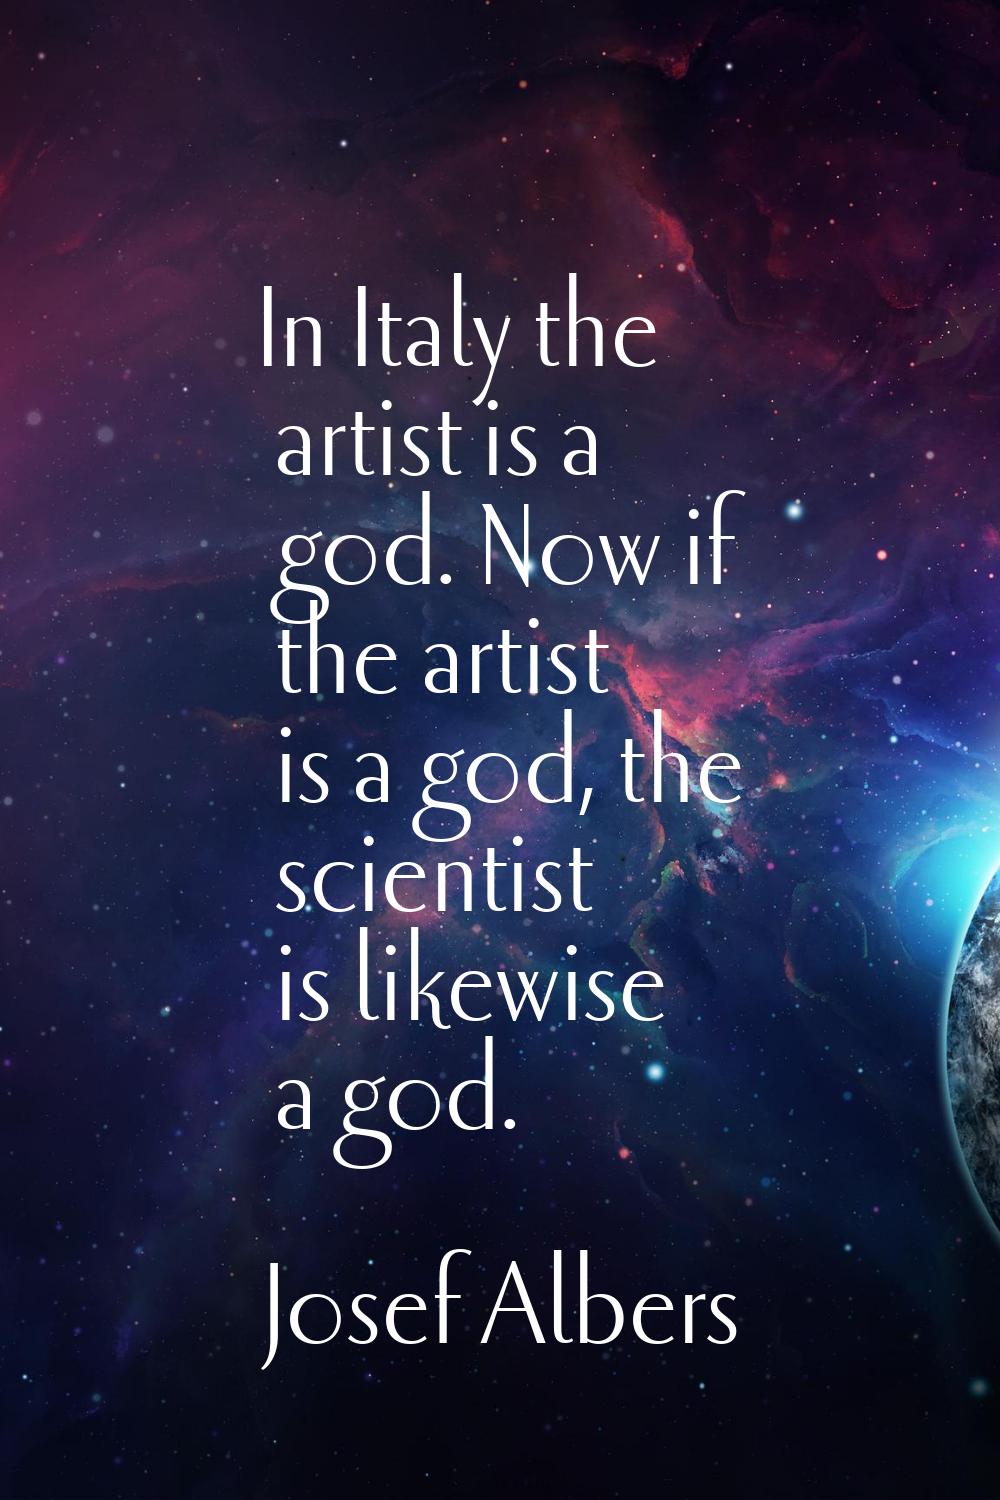 In Italy the artist is a god. Now if the artist is a god, the scientist is likewise a god.